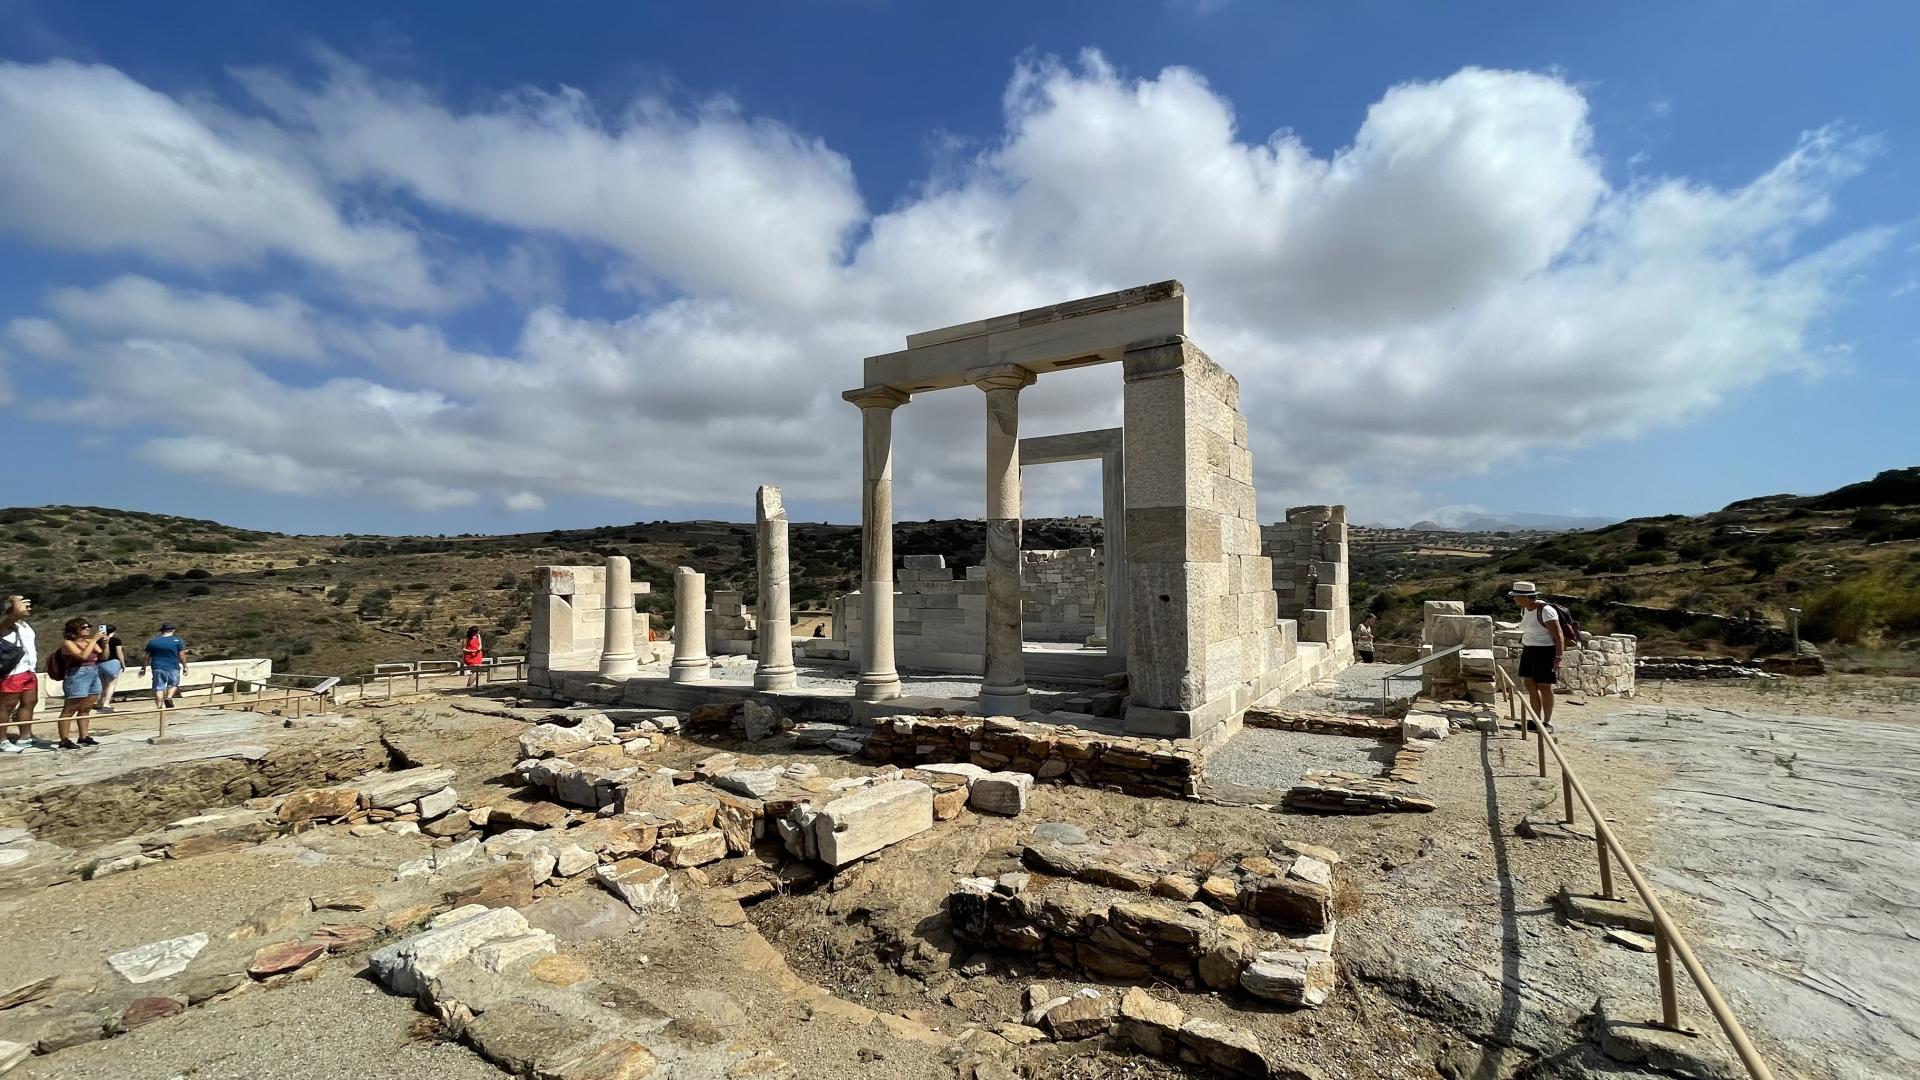 The Temple of Demeter on Naxos